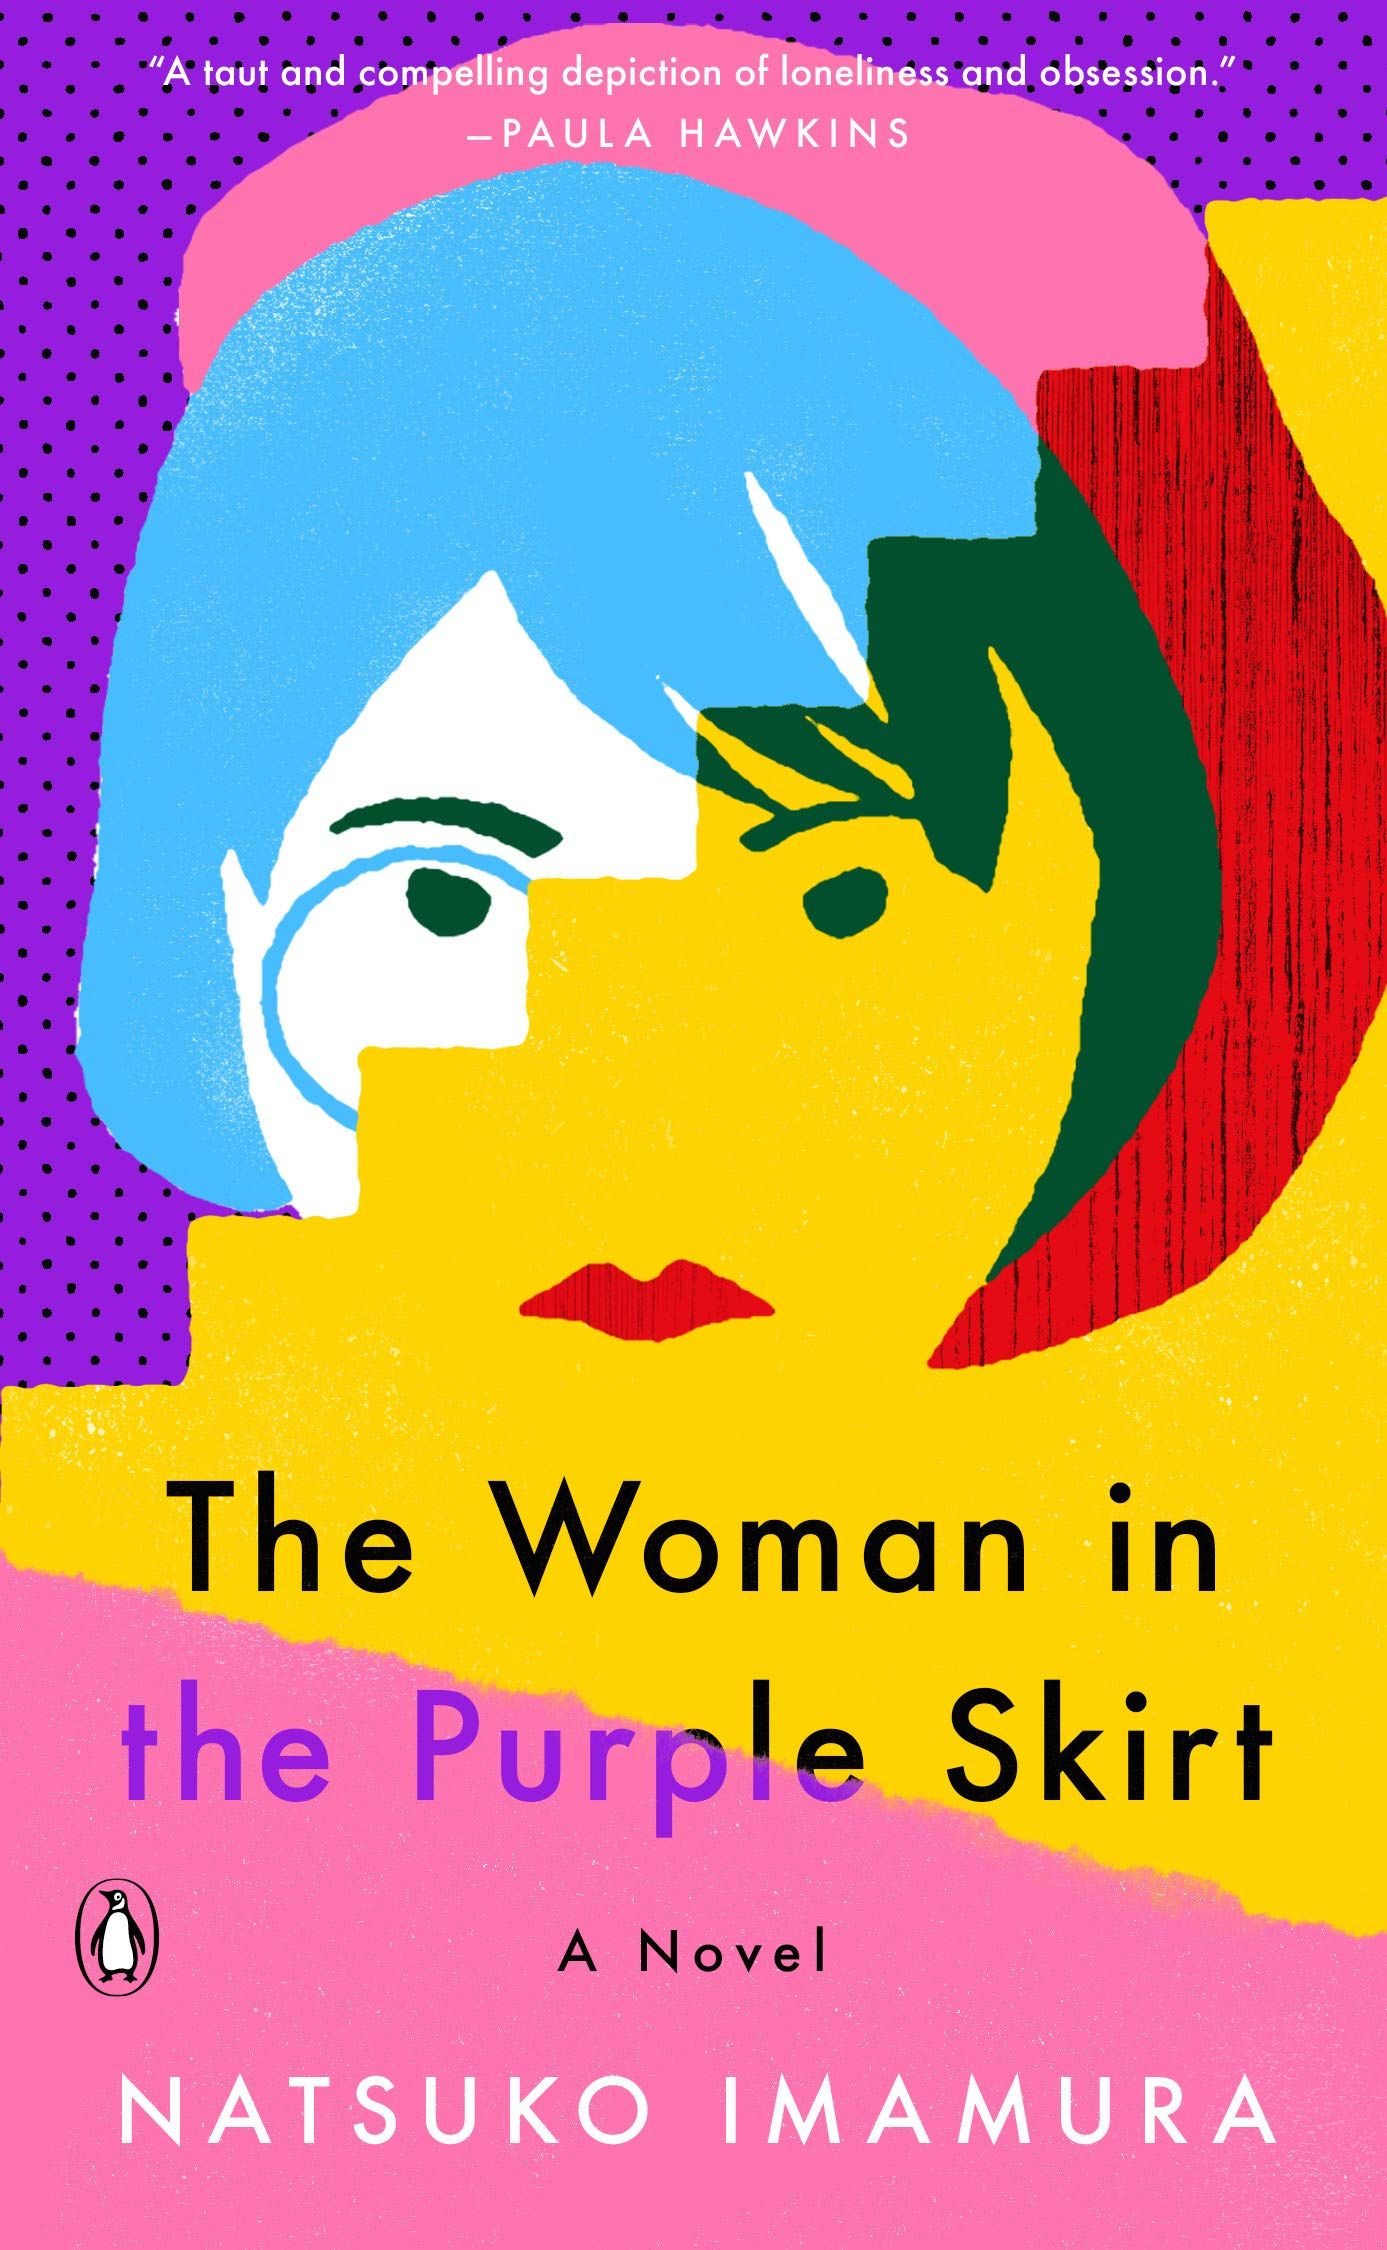 The Woman in the Purple Skirt by Natsuko Imamura, translated by Lucy North